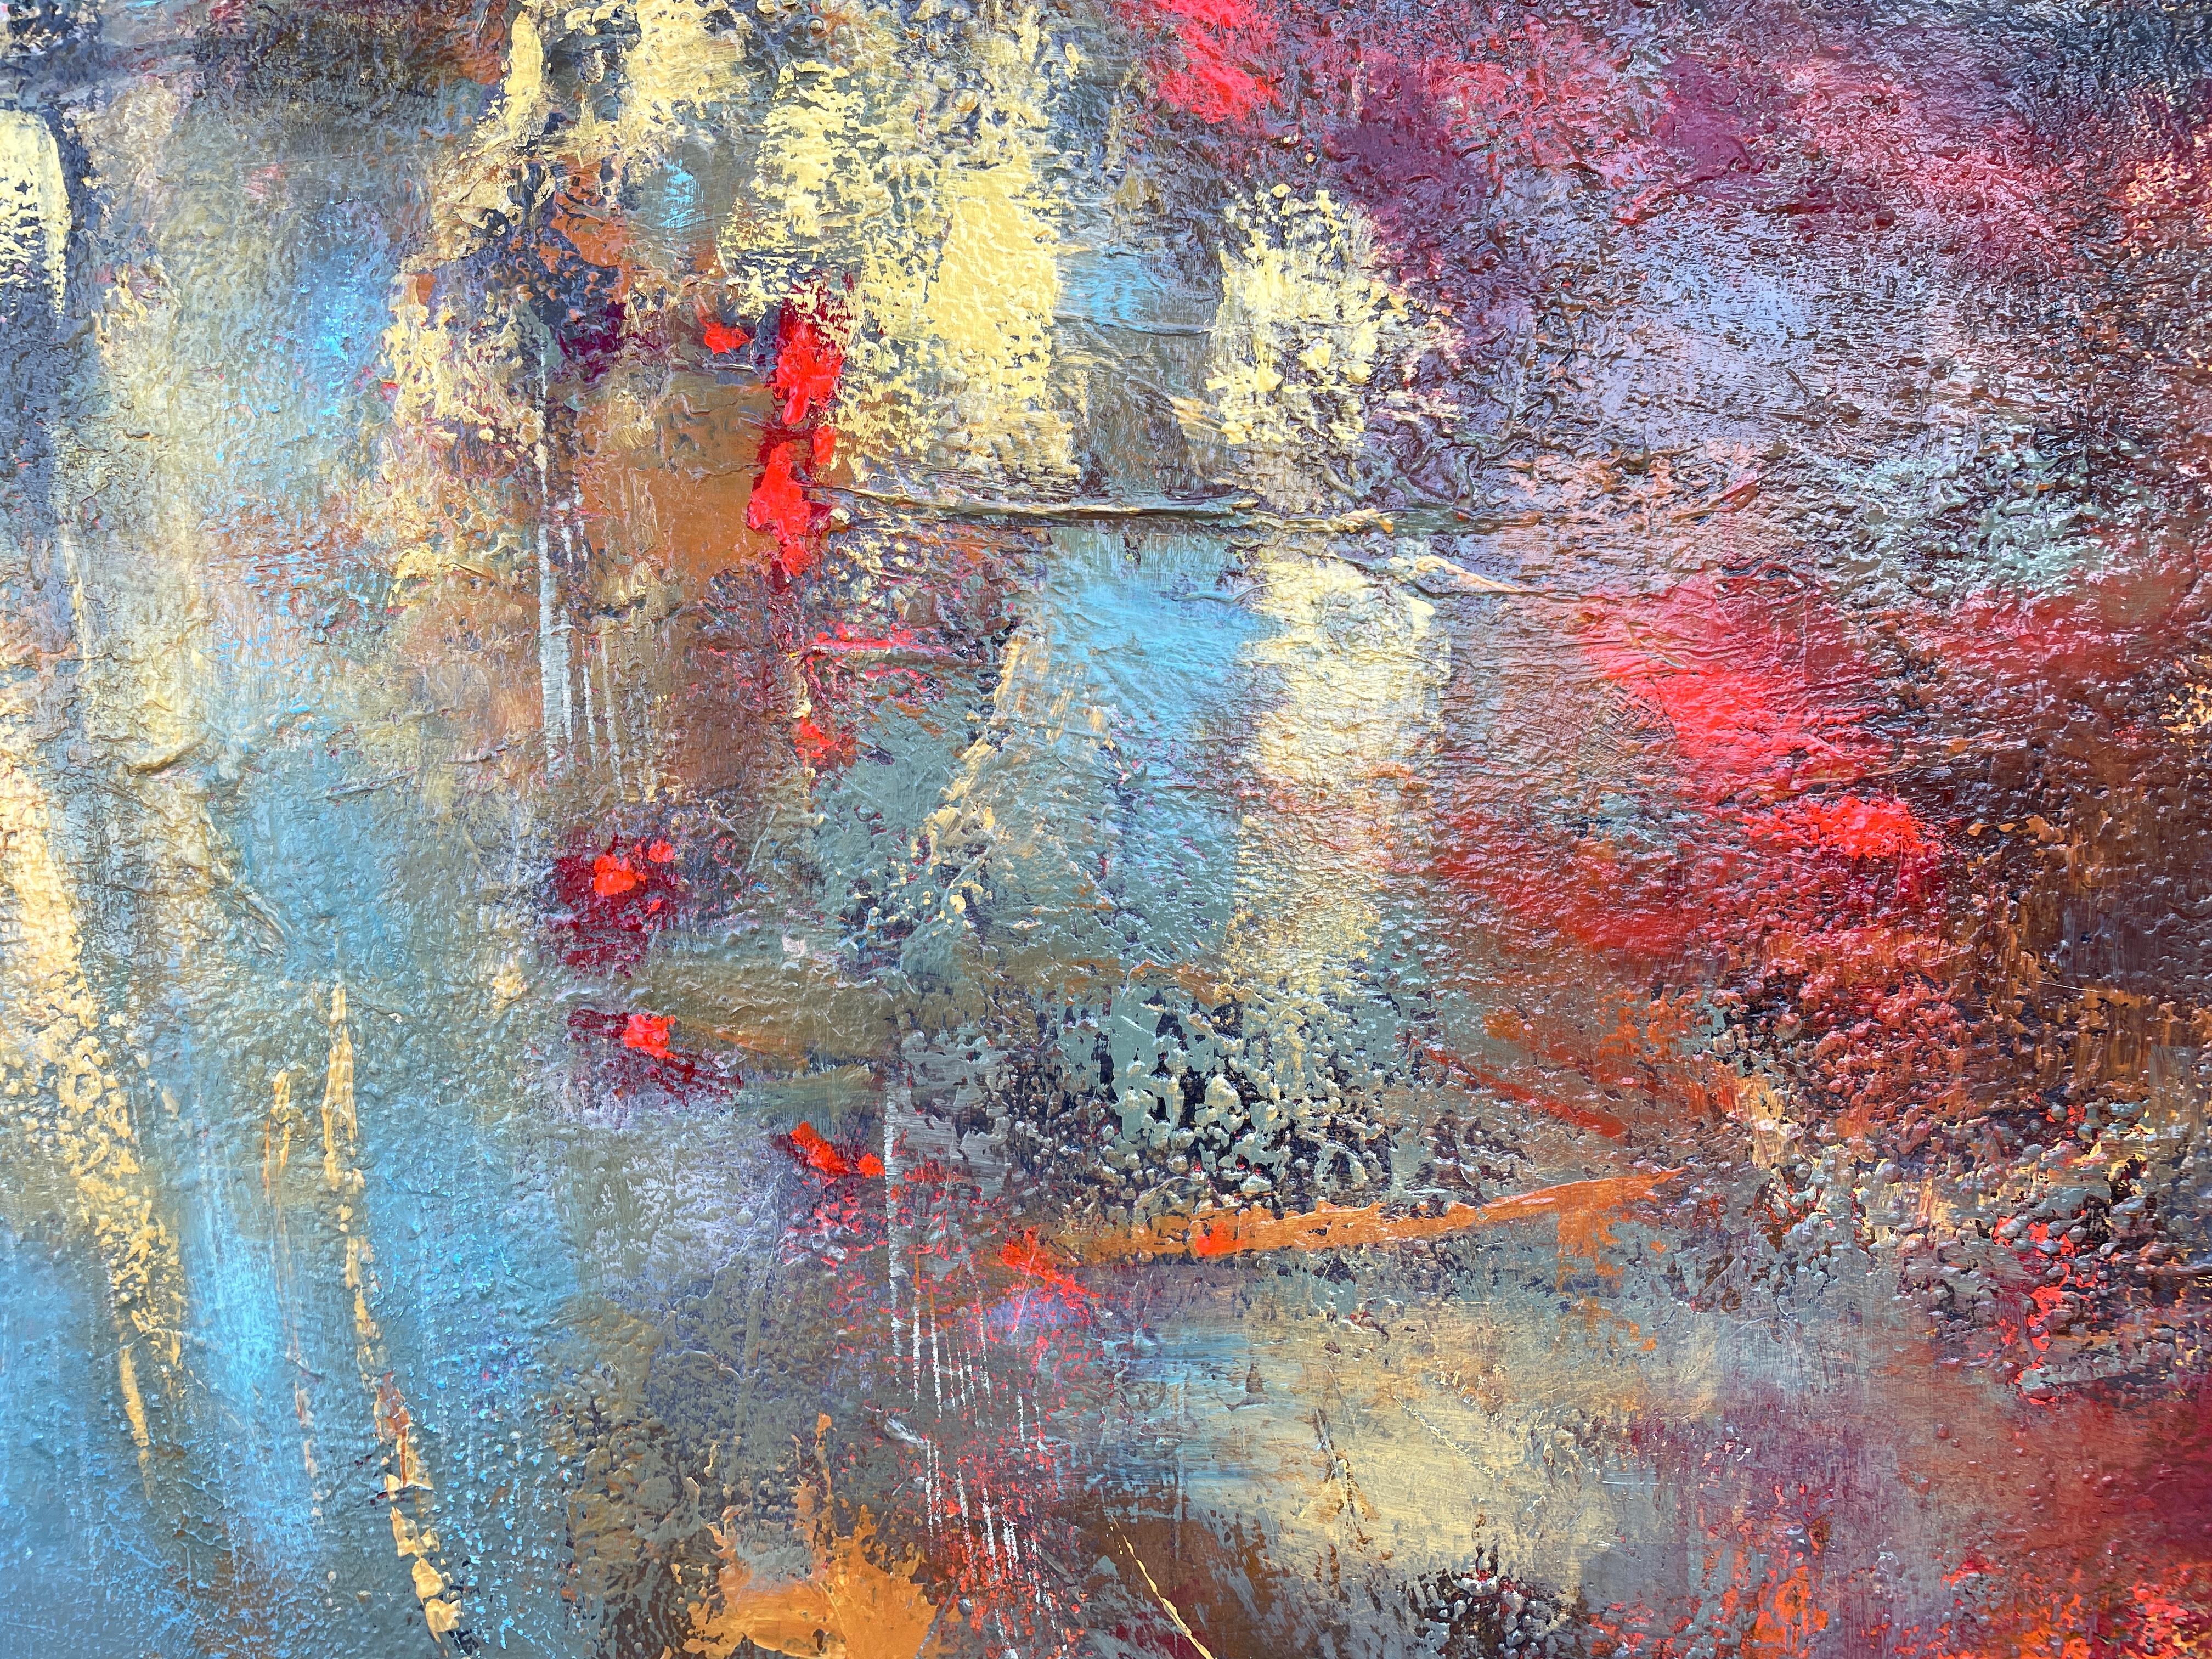 'Quiet Harbor' - Golden Textured Waterscape - Large Abstract Expressionism  3